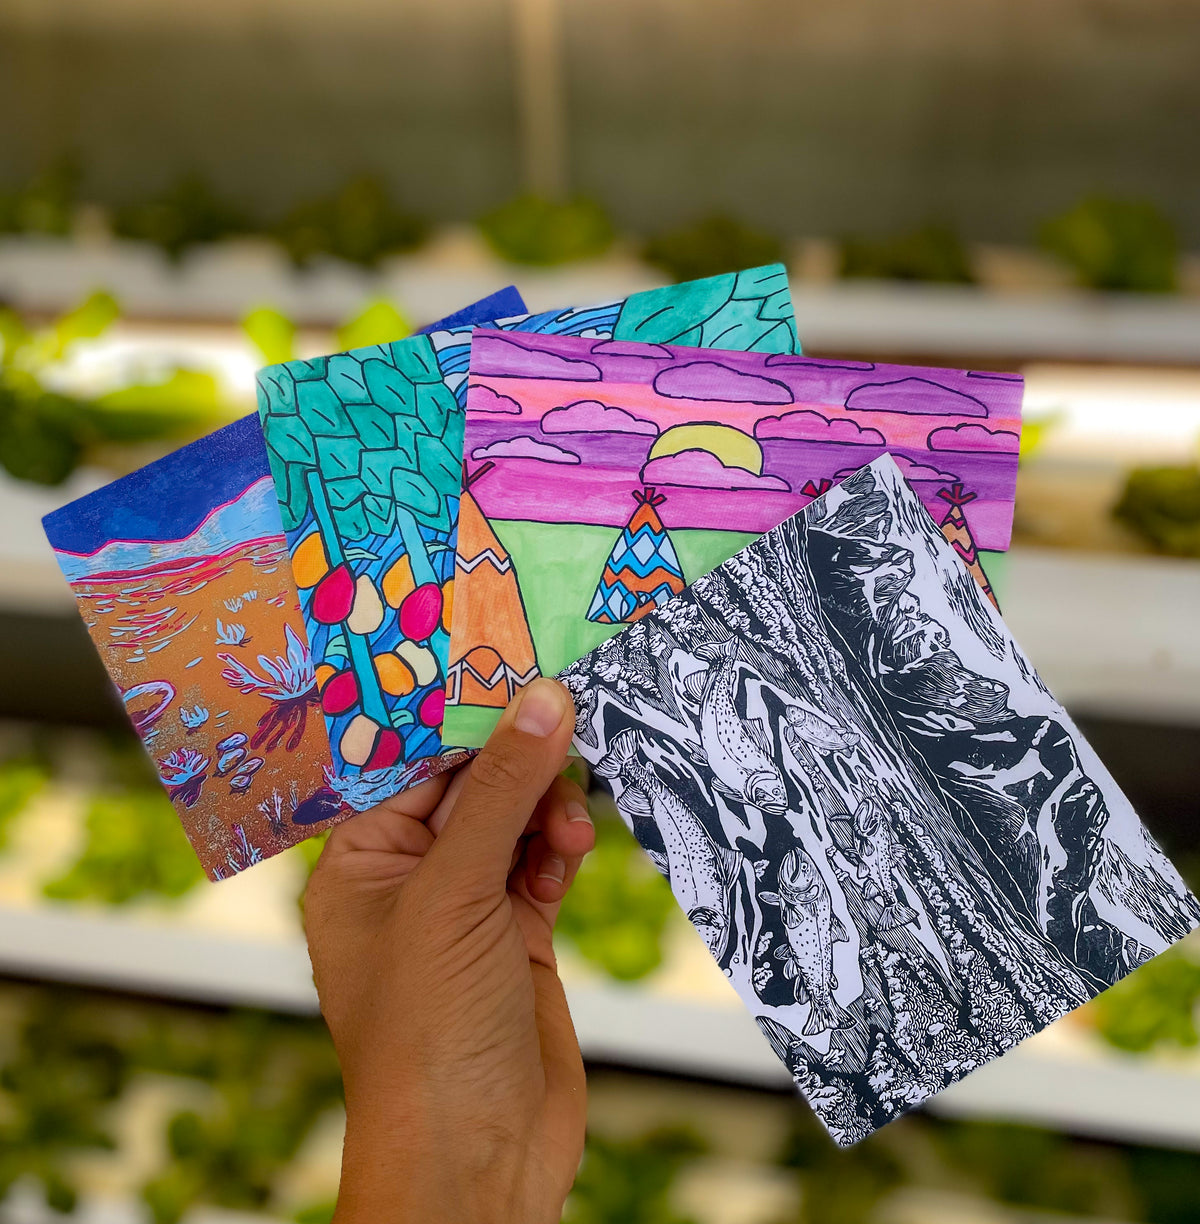 Original Art Cards Made by our Farmers!